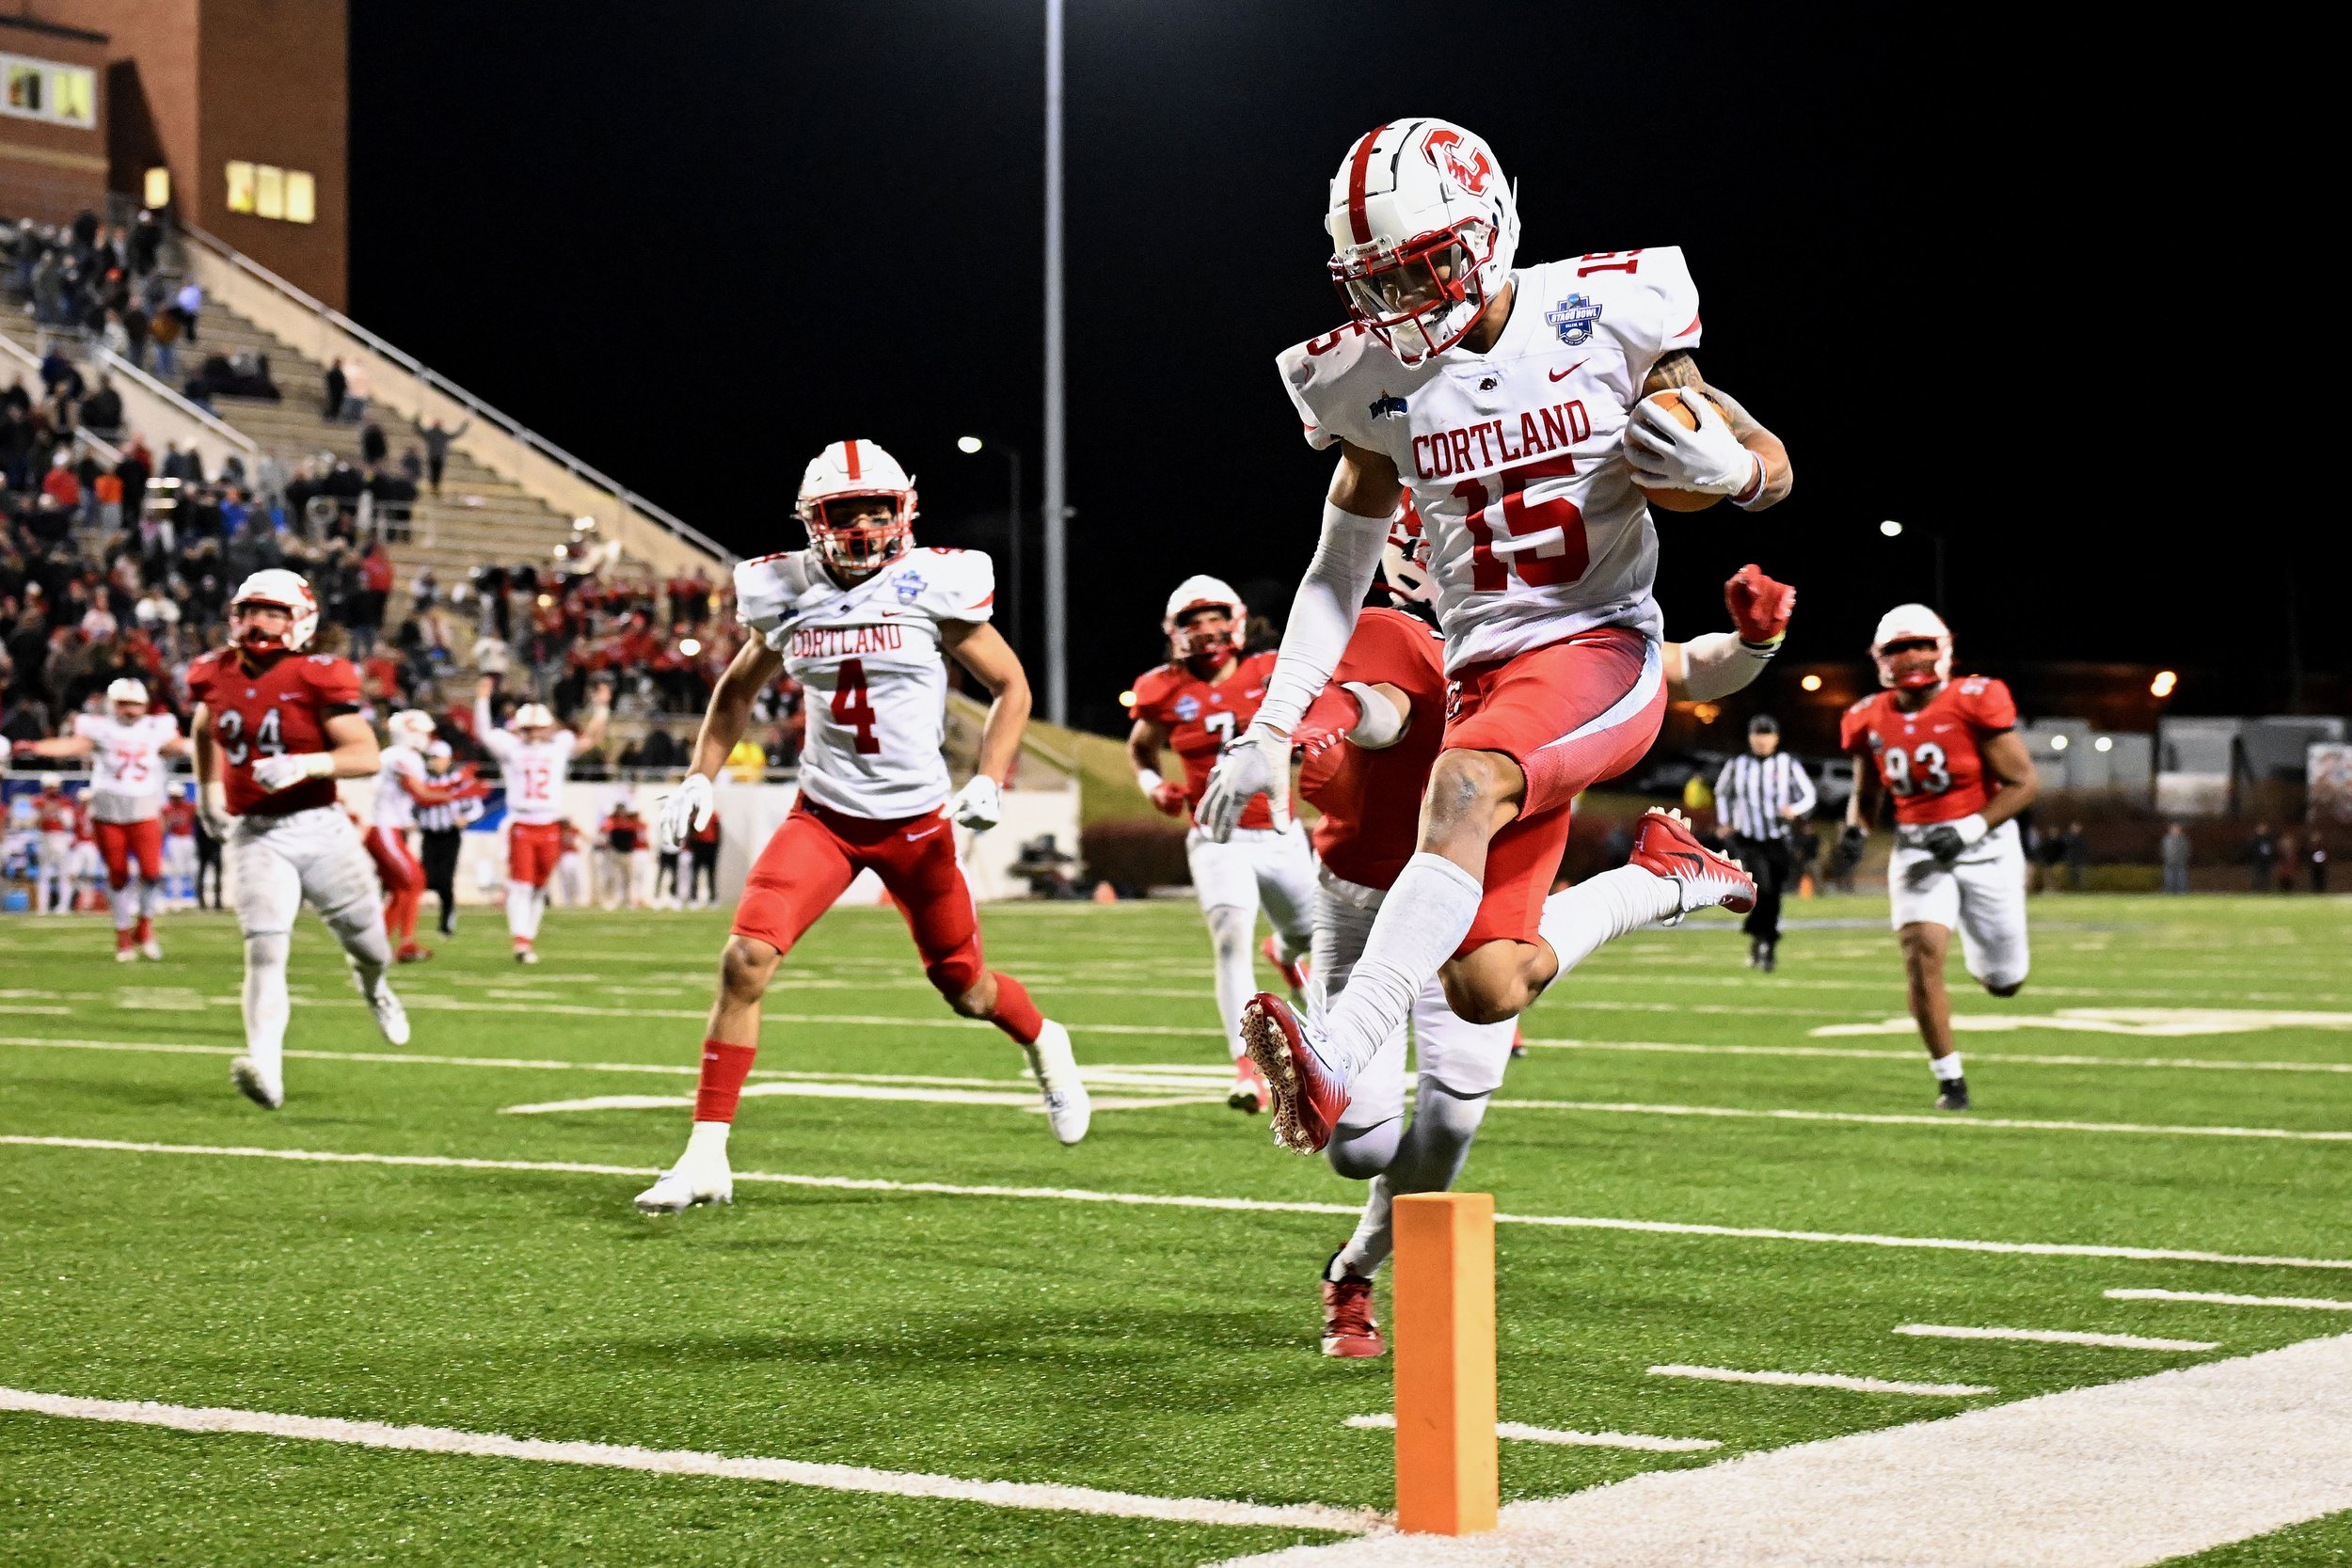  SALEM, VIRGINIA - DECEMBER 15:  Cole Burgess #15 of the Cortland Red Dragons scores the final touchdown against the North Central Cardinals during the Division III Football Championship held at Salem Stadium on December 15, 2023 in Salem, Virginia. 